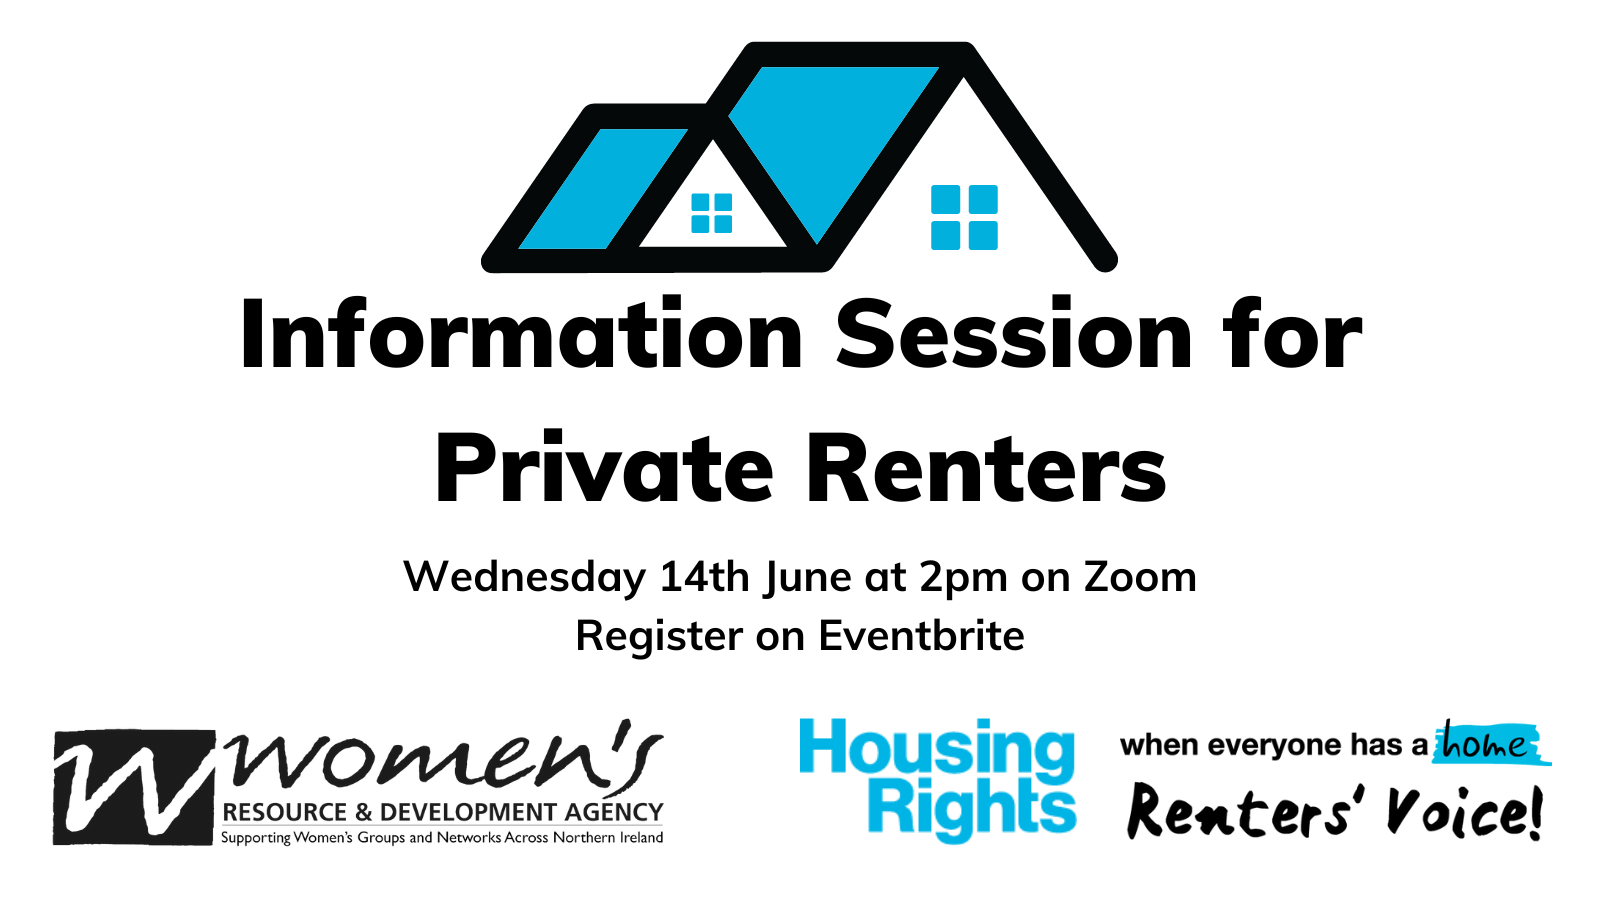 Information session for private renters. Wednesday 14th June on Zoom. Register on eventbrite.